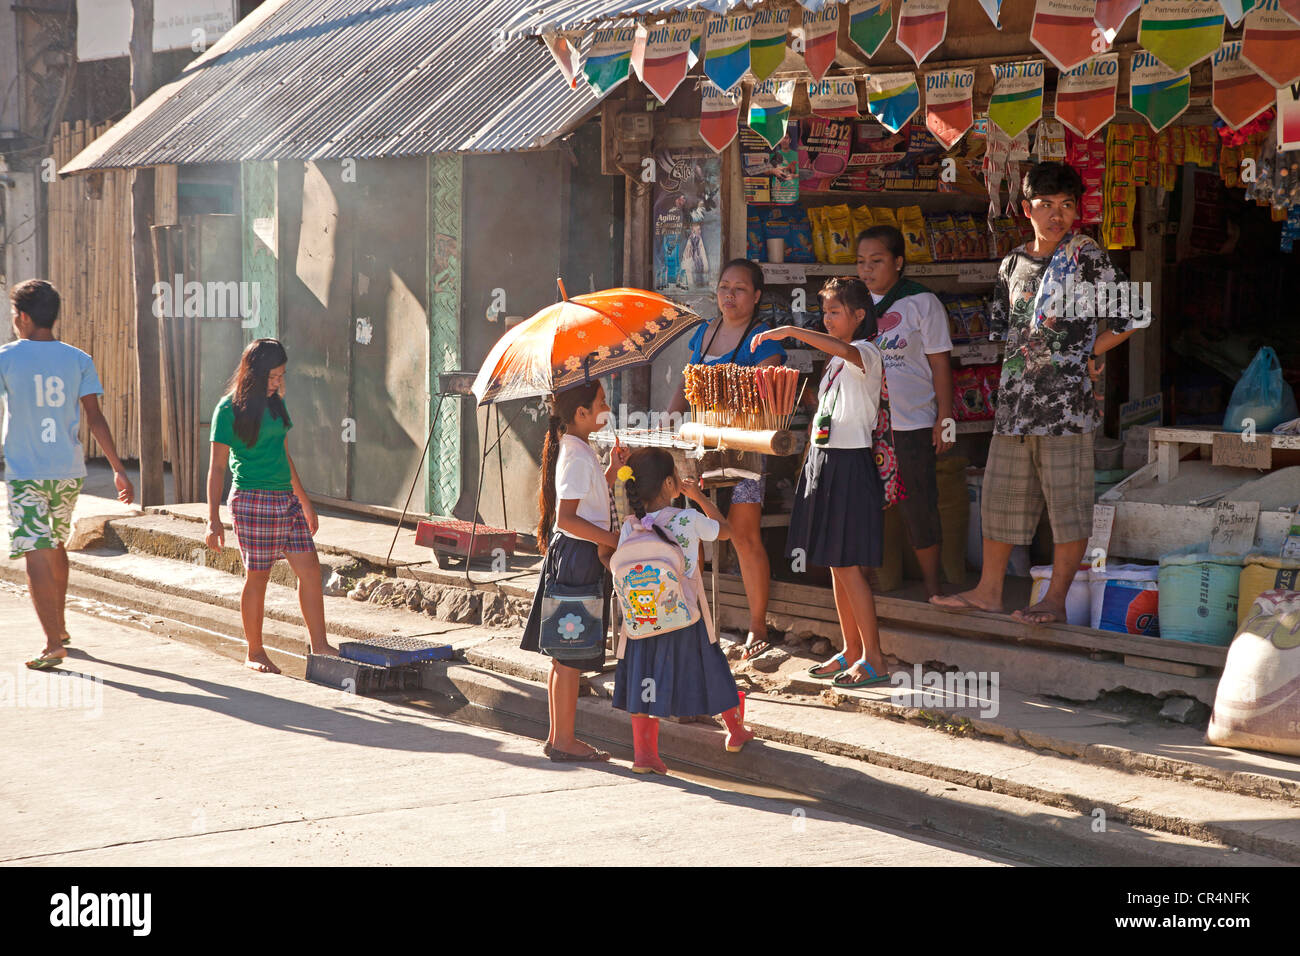 store and food stall in El Nido, Palawan, Philippines, Asia Stock Photo